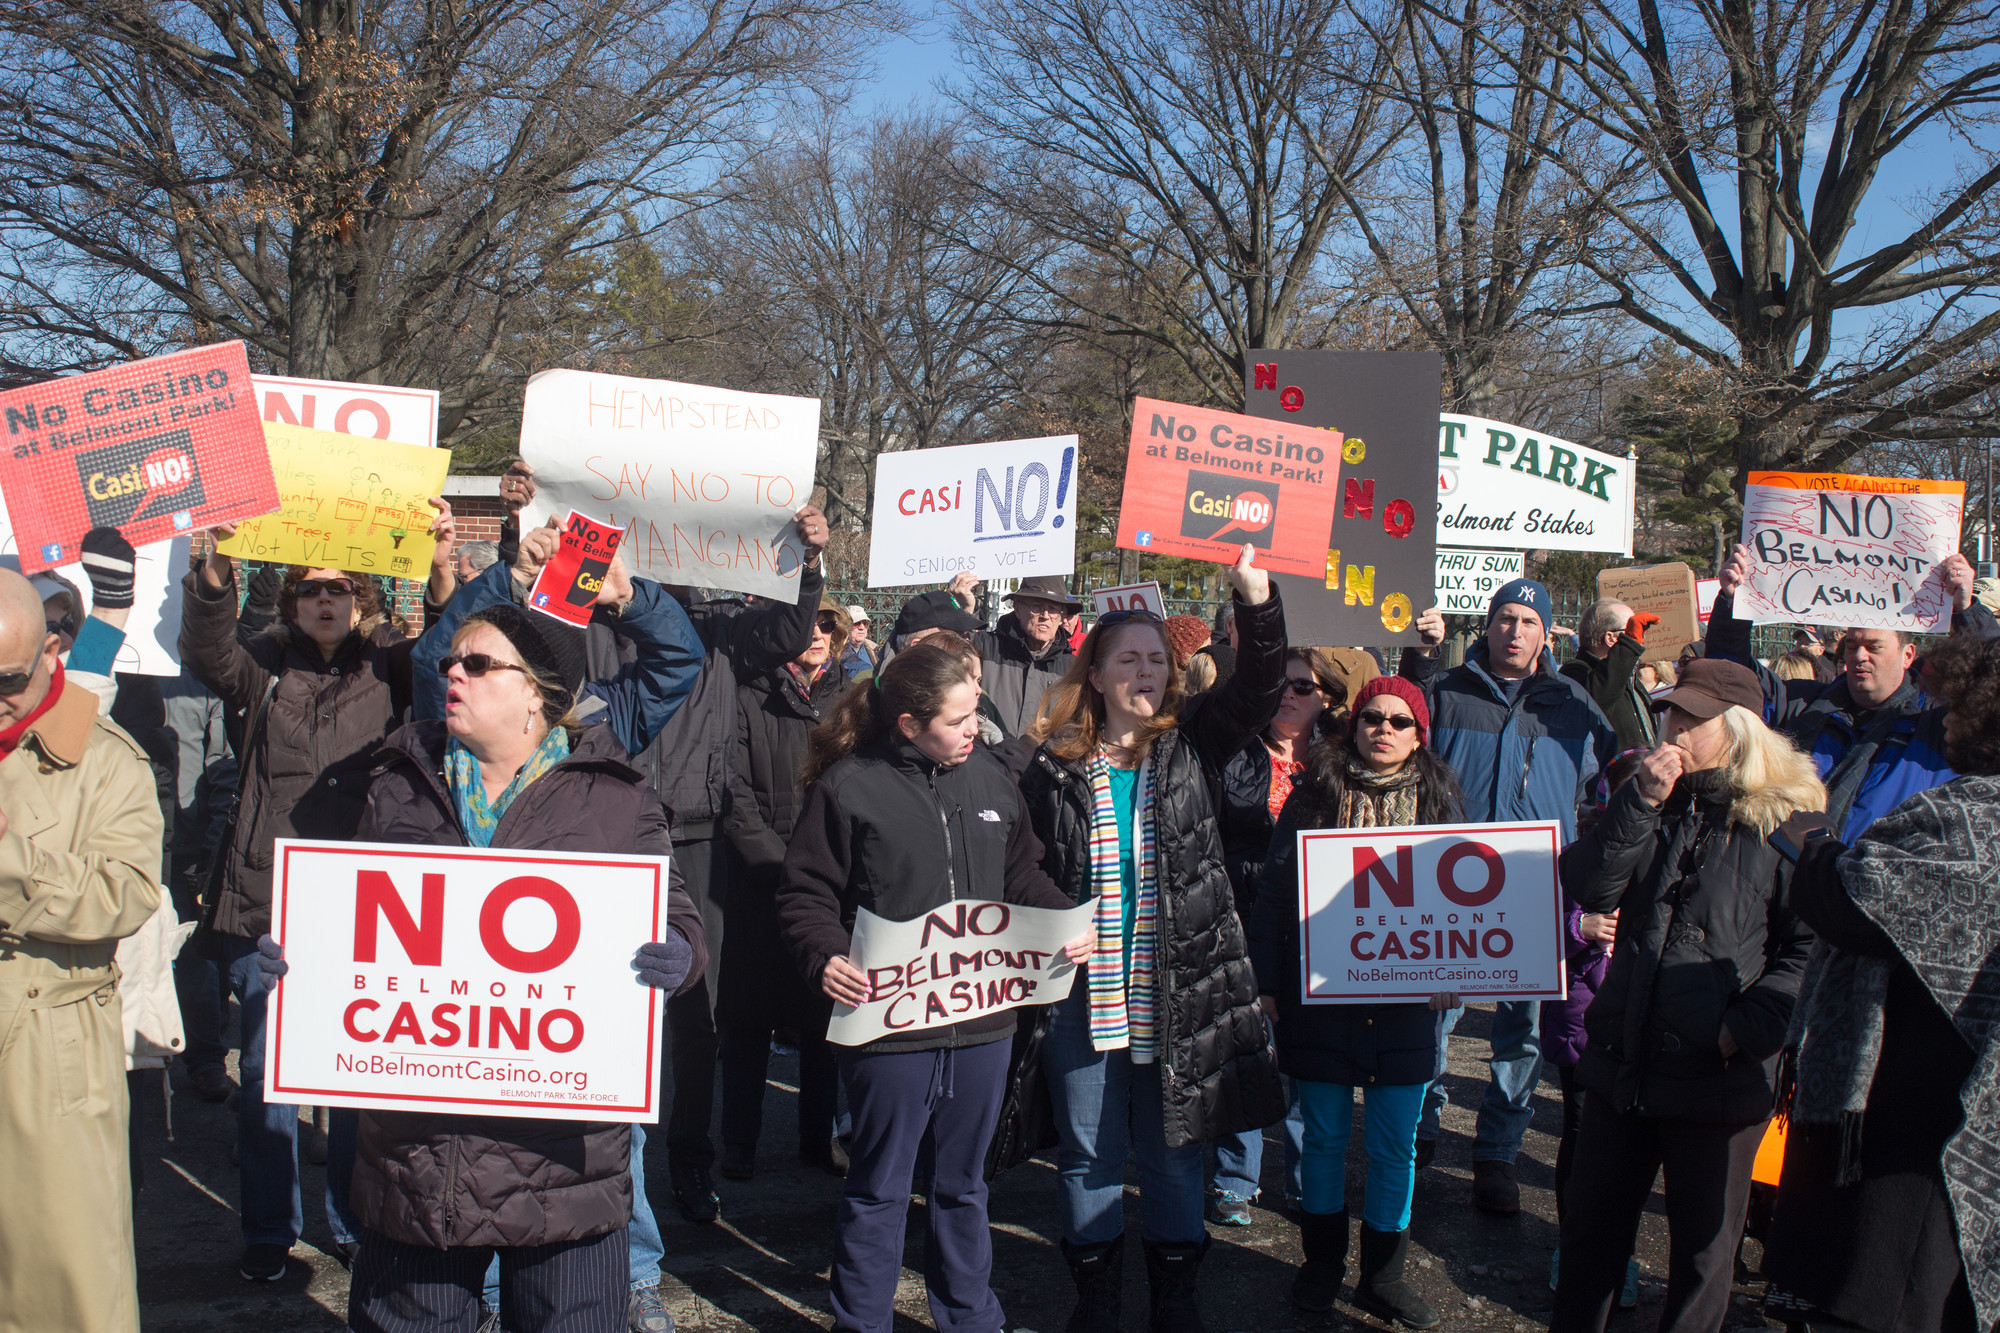 The anti-VLT protest was the second-largest showing of the group, after the Jan. 12 rally at Floral Park High School.